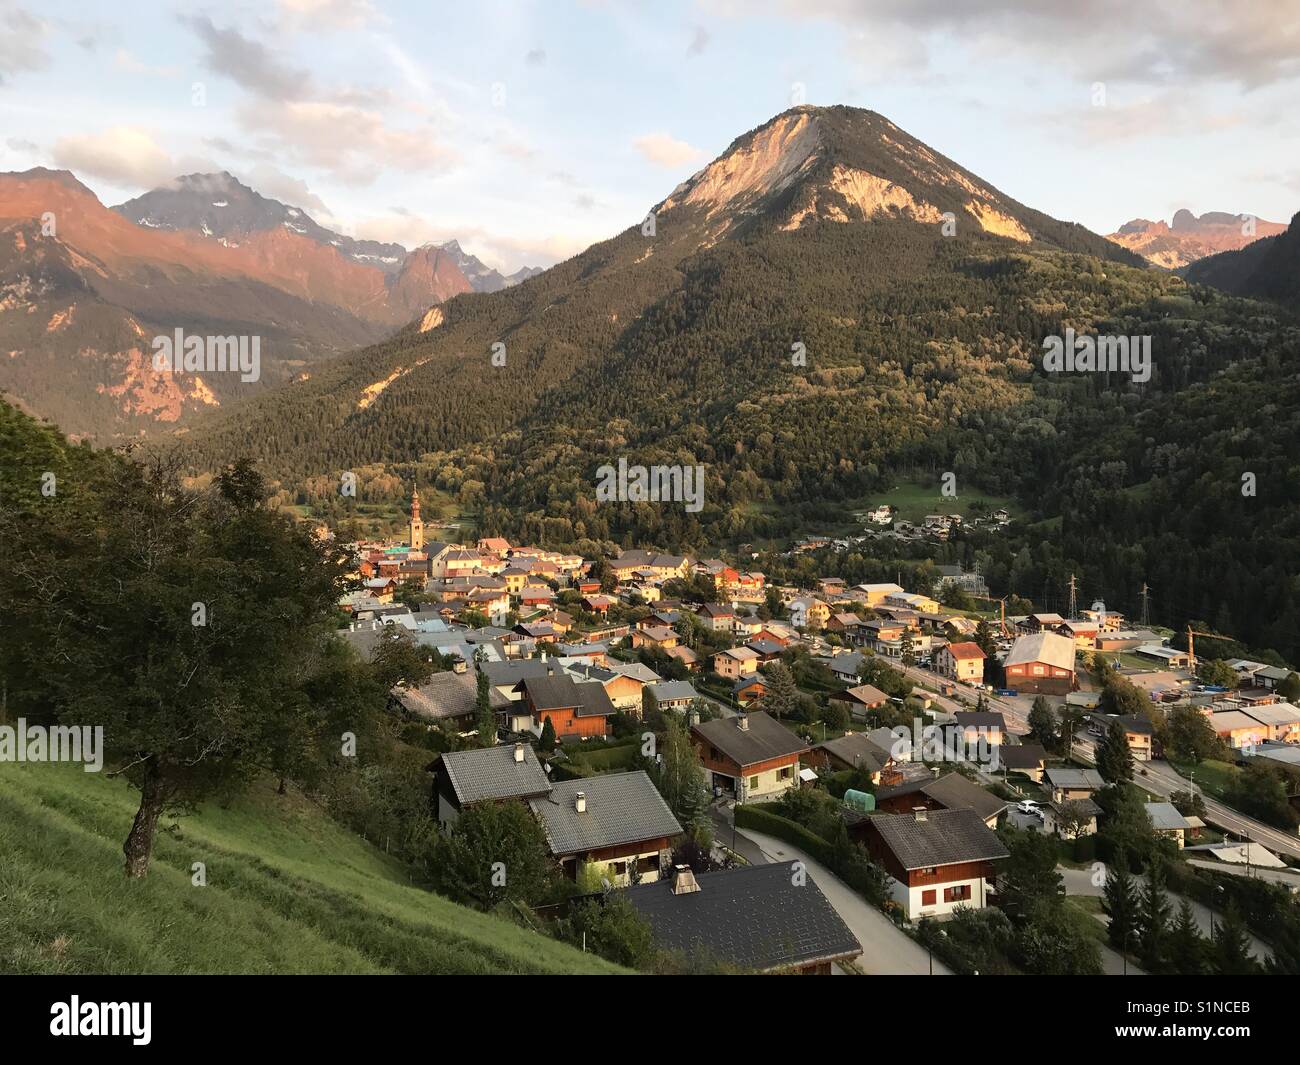 Evening comes over the mountain village landscape view Stock Photo